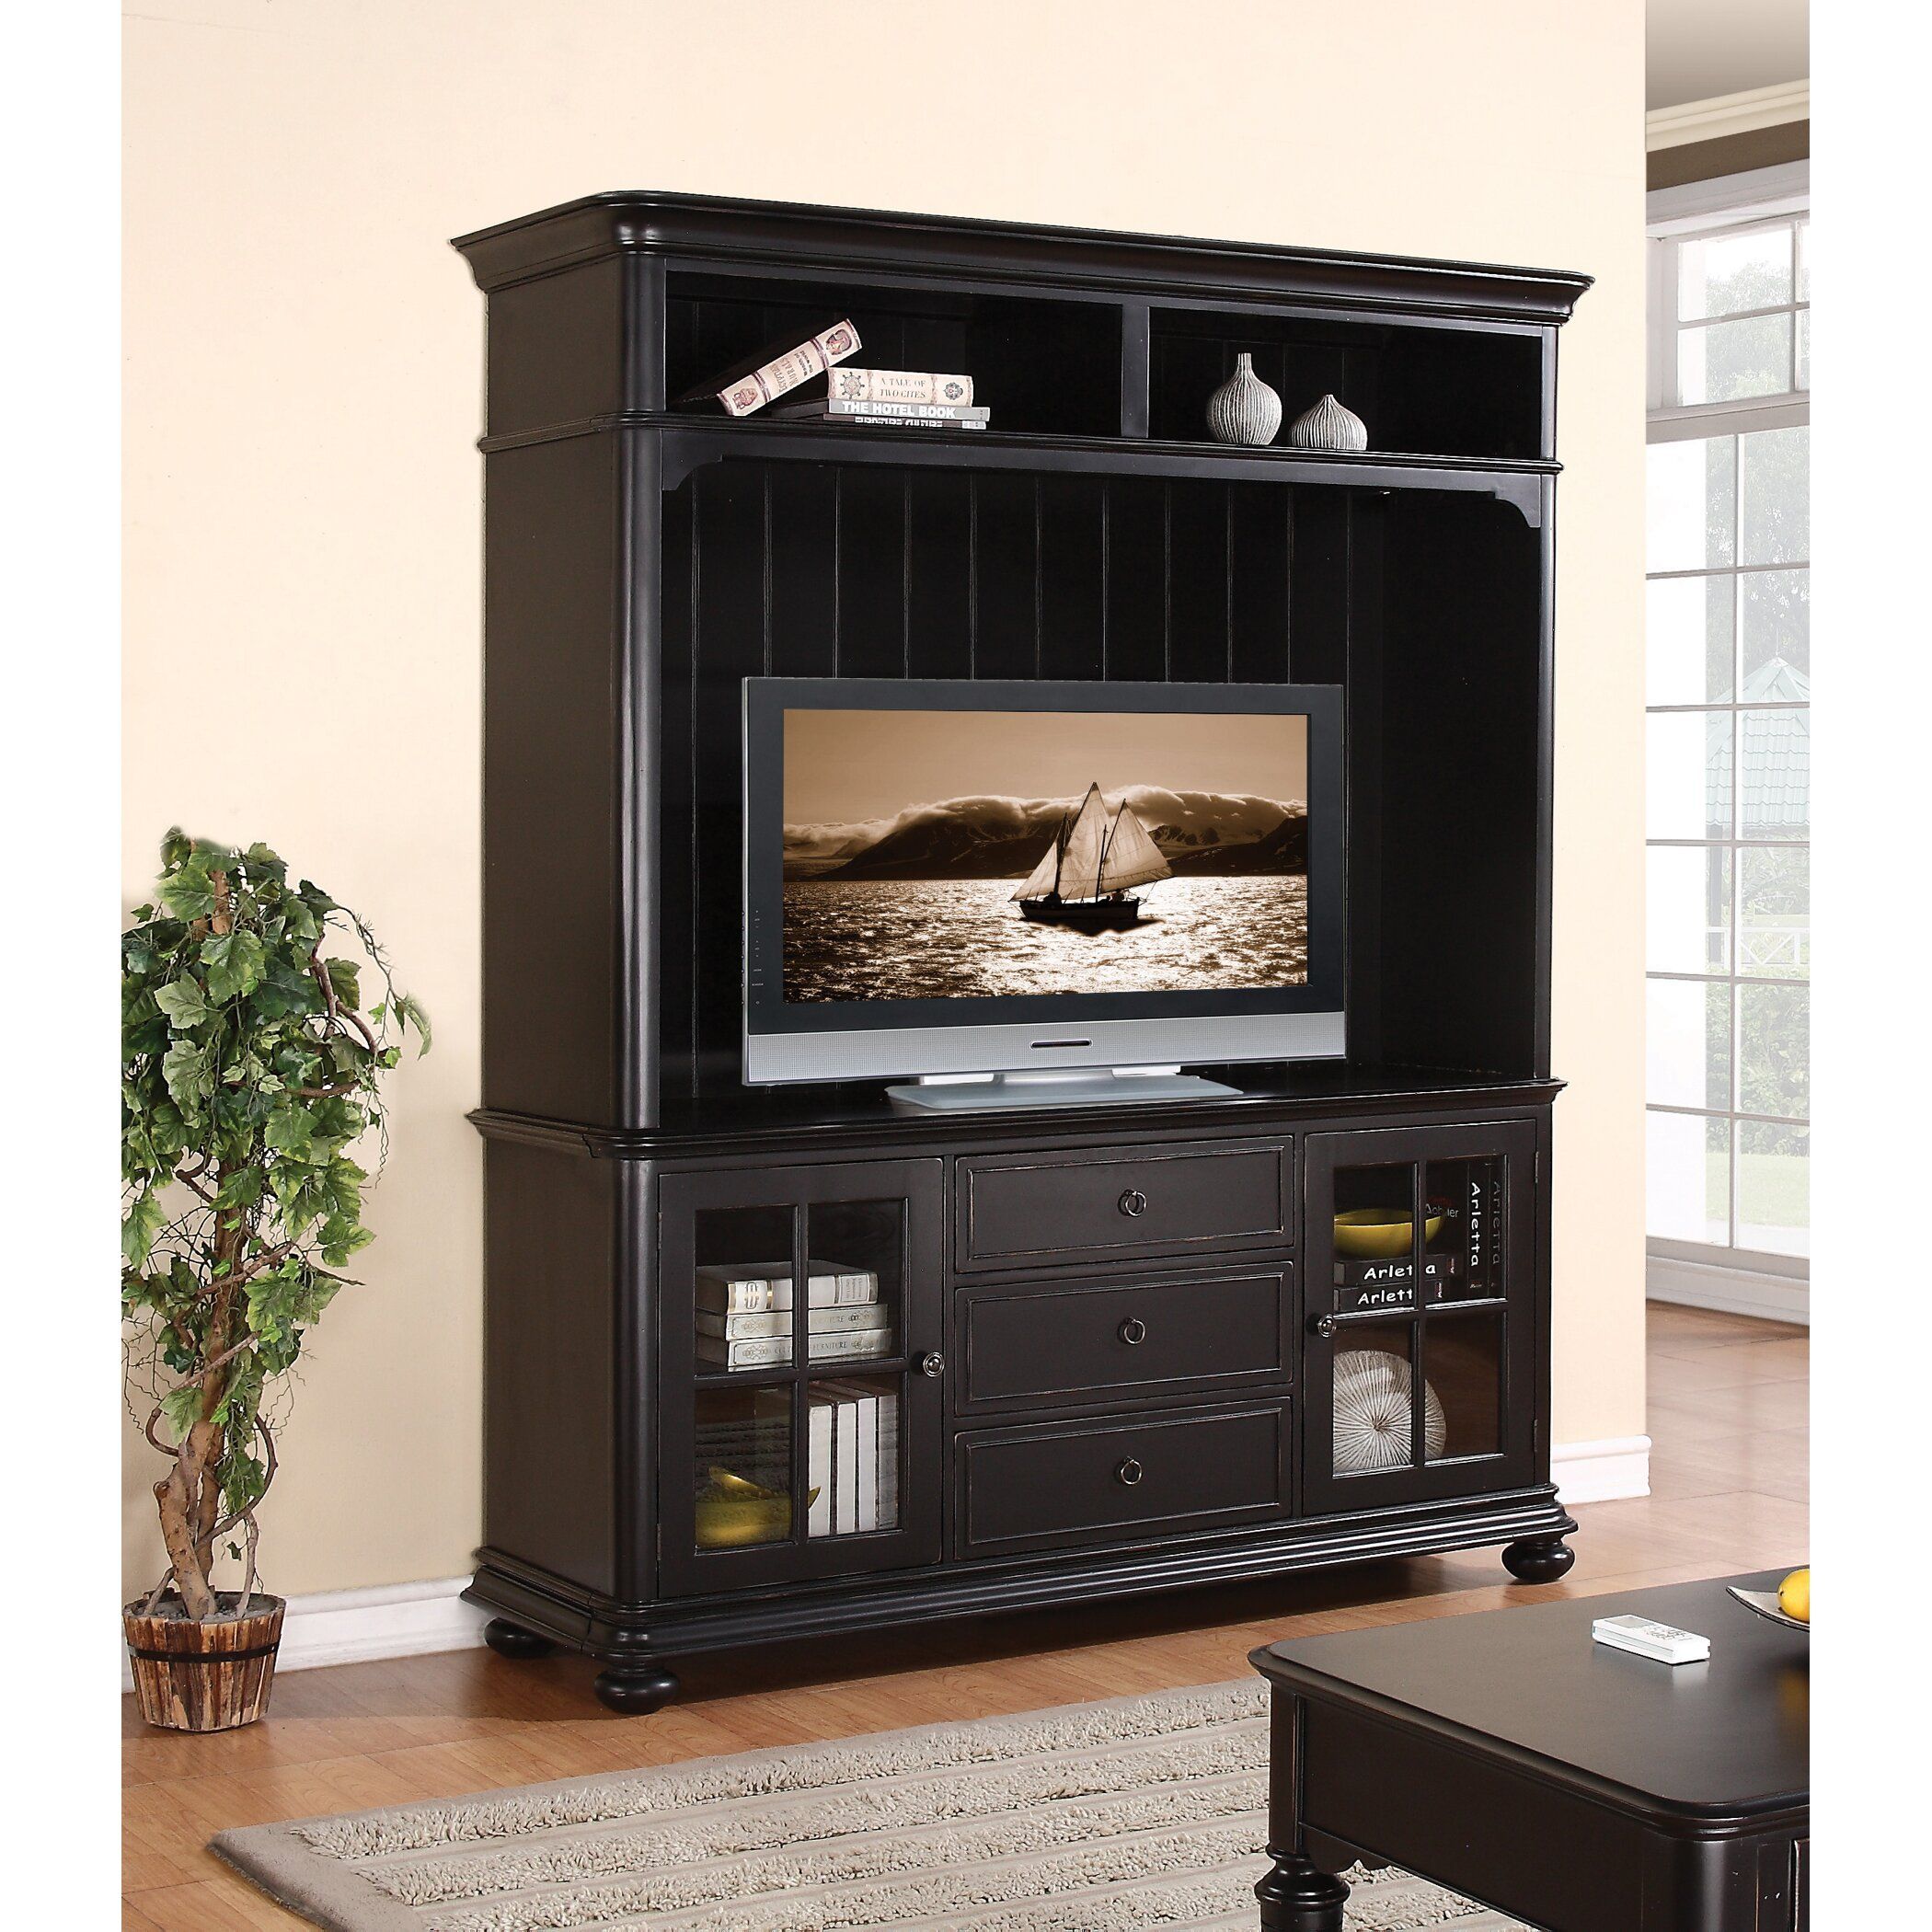 Riverside Furniture Summit Tv Stand & Reviews | Wayfair Within Small Tv Stands For Top Of Dresser (View 4 of 15)